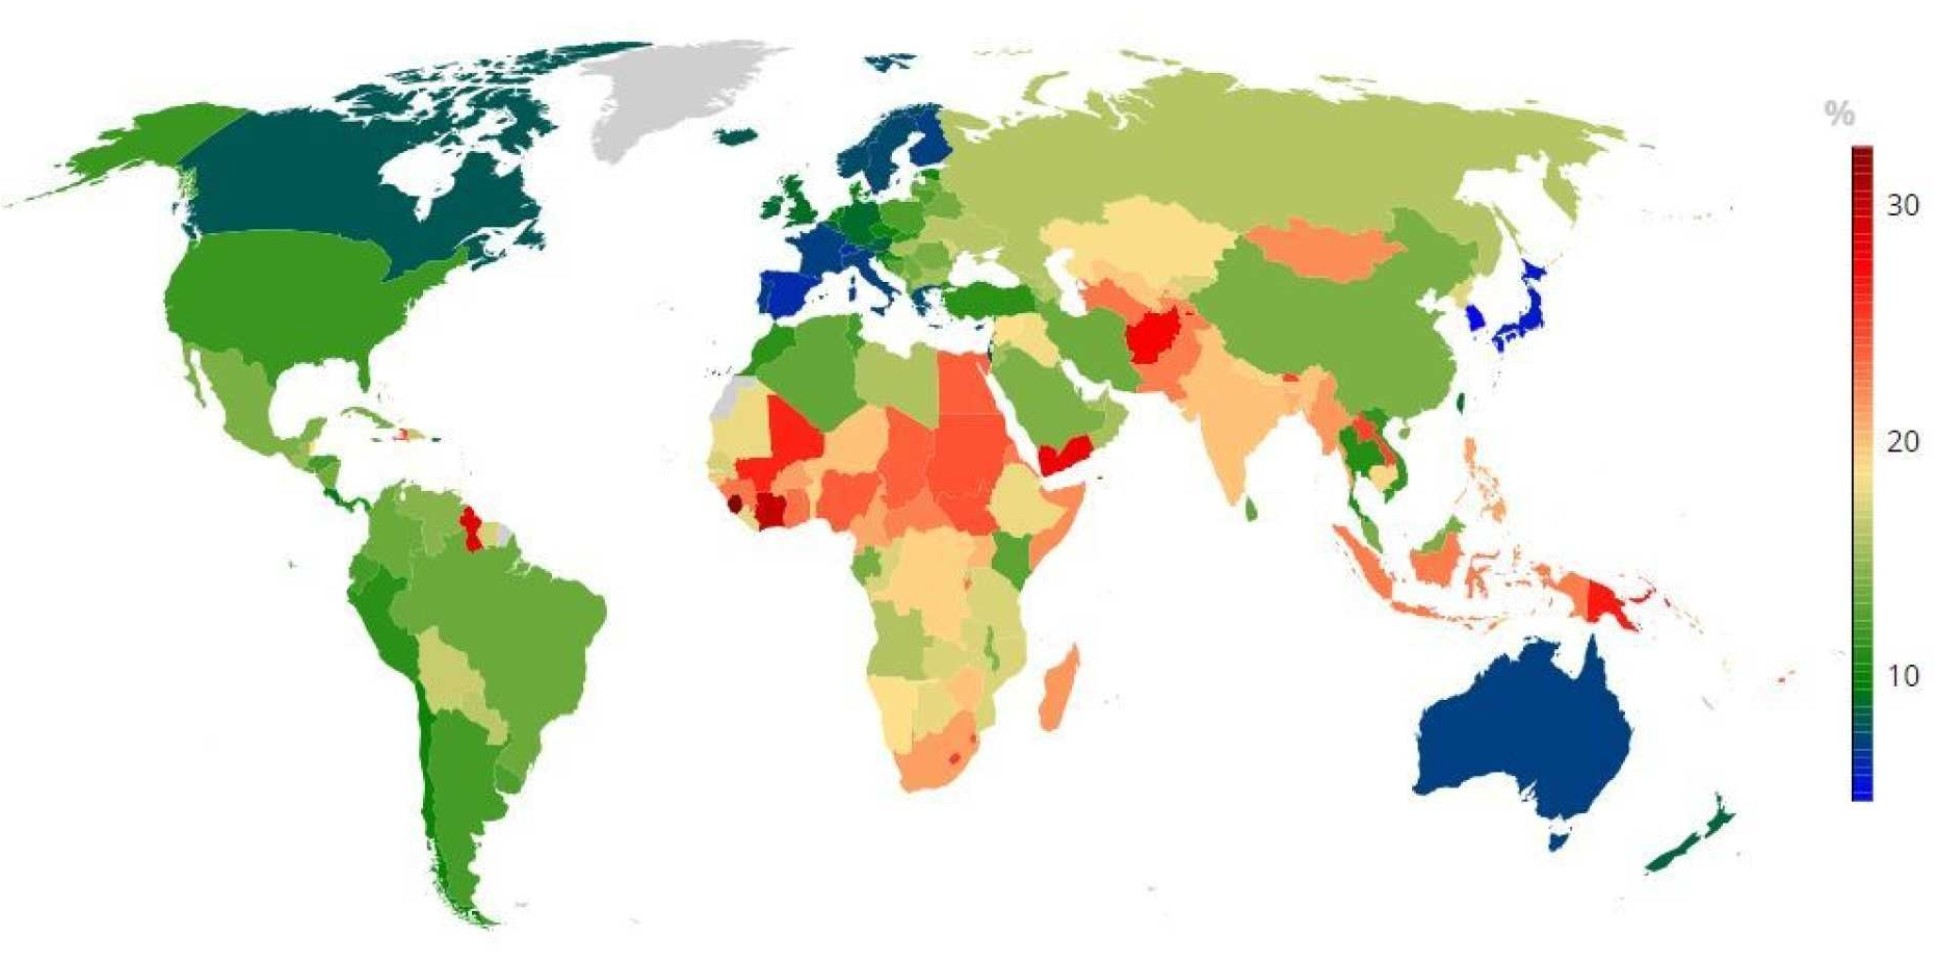 World map showing the probability of dying early from chronic disease between 30 and 70 years of age